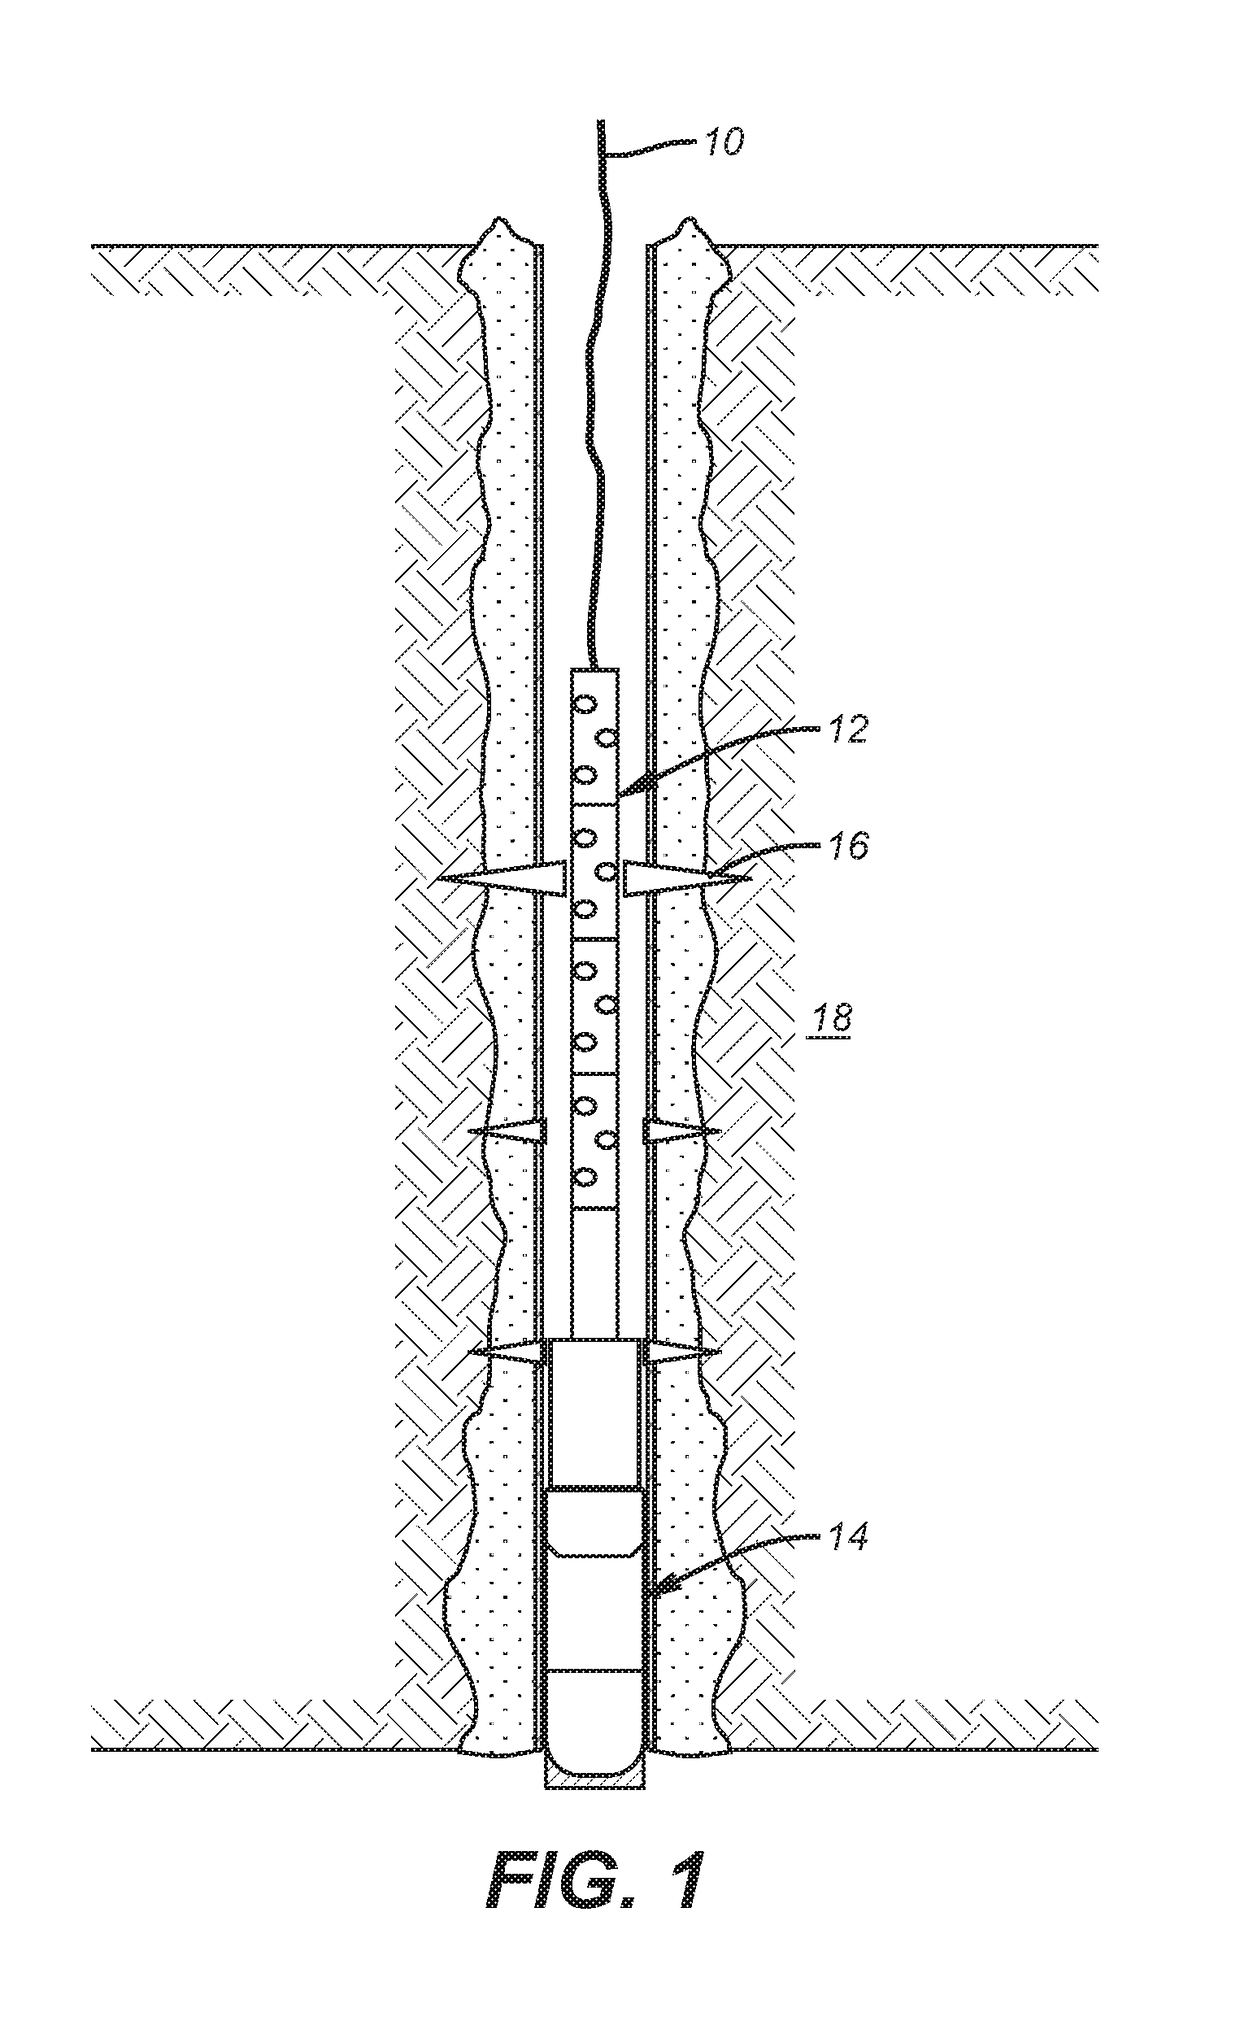 Method of reducing impact of differential breakdown stress in a treated interval